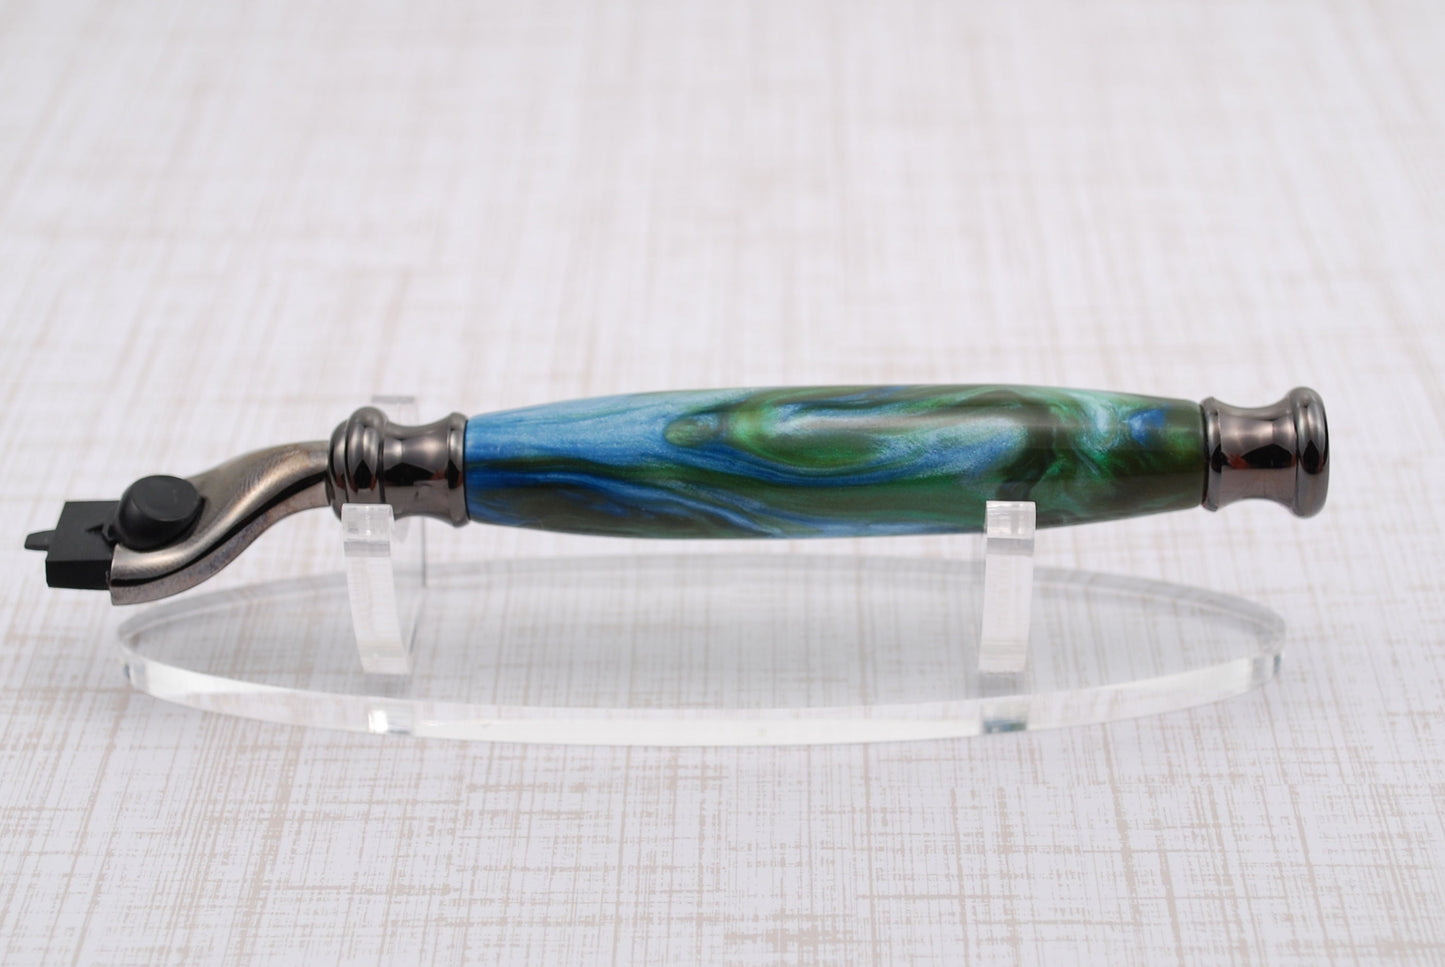 Mach3 Razor - Chrome with a Green and Blue Resin Handle